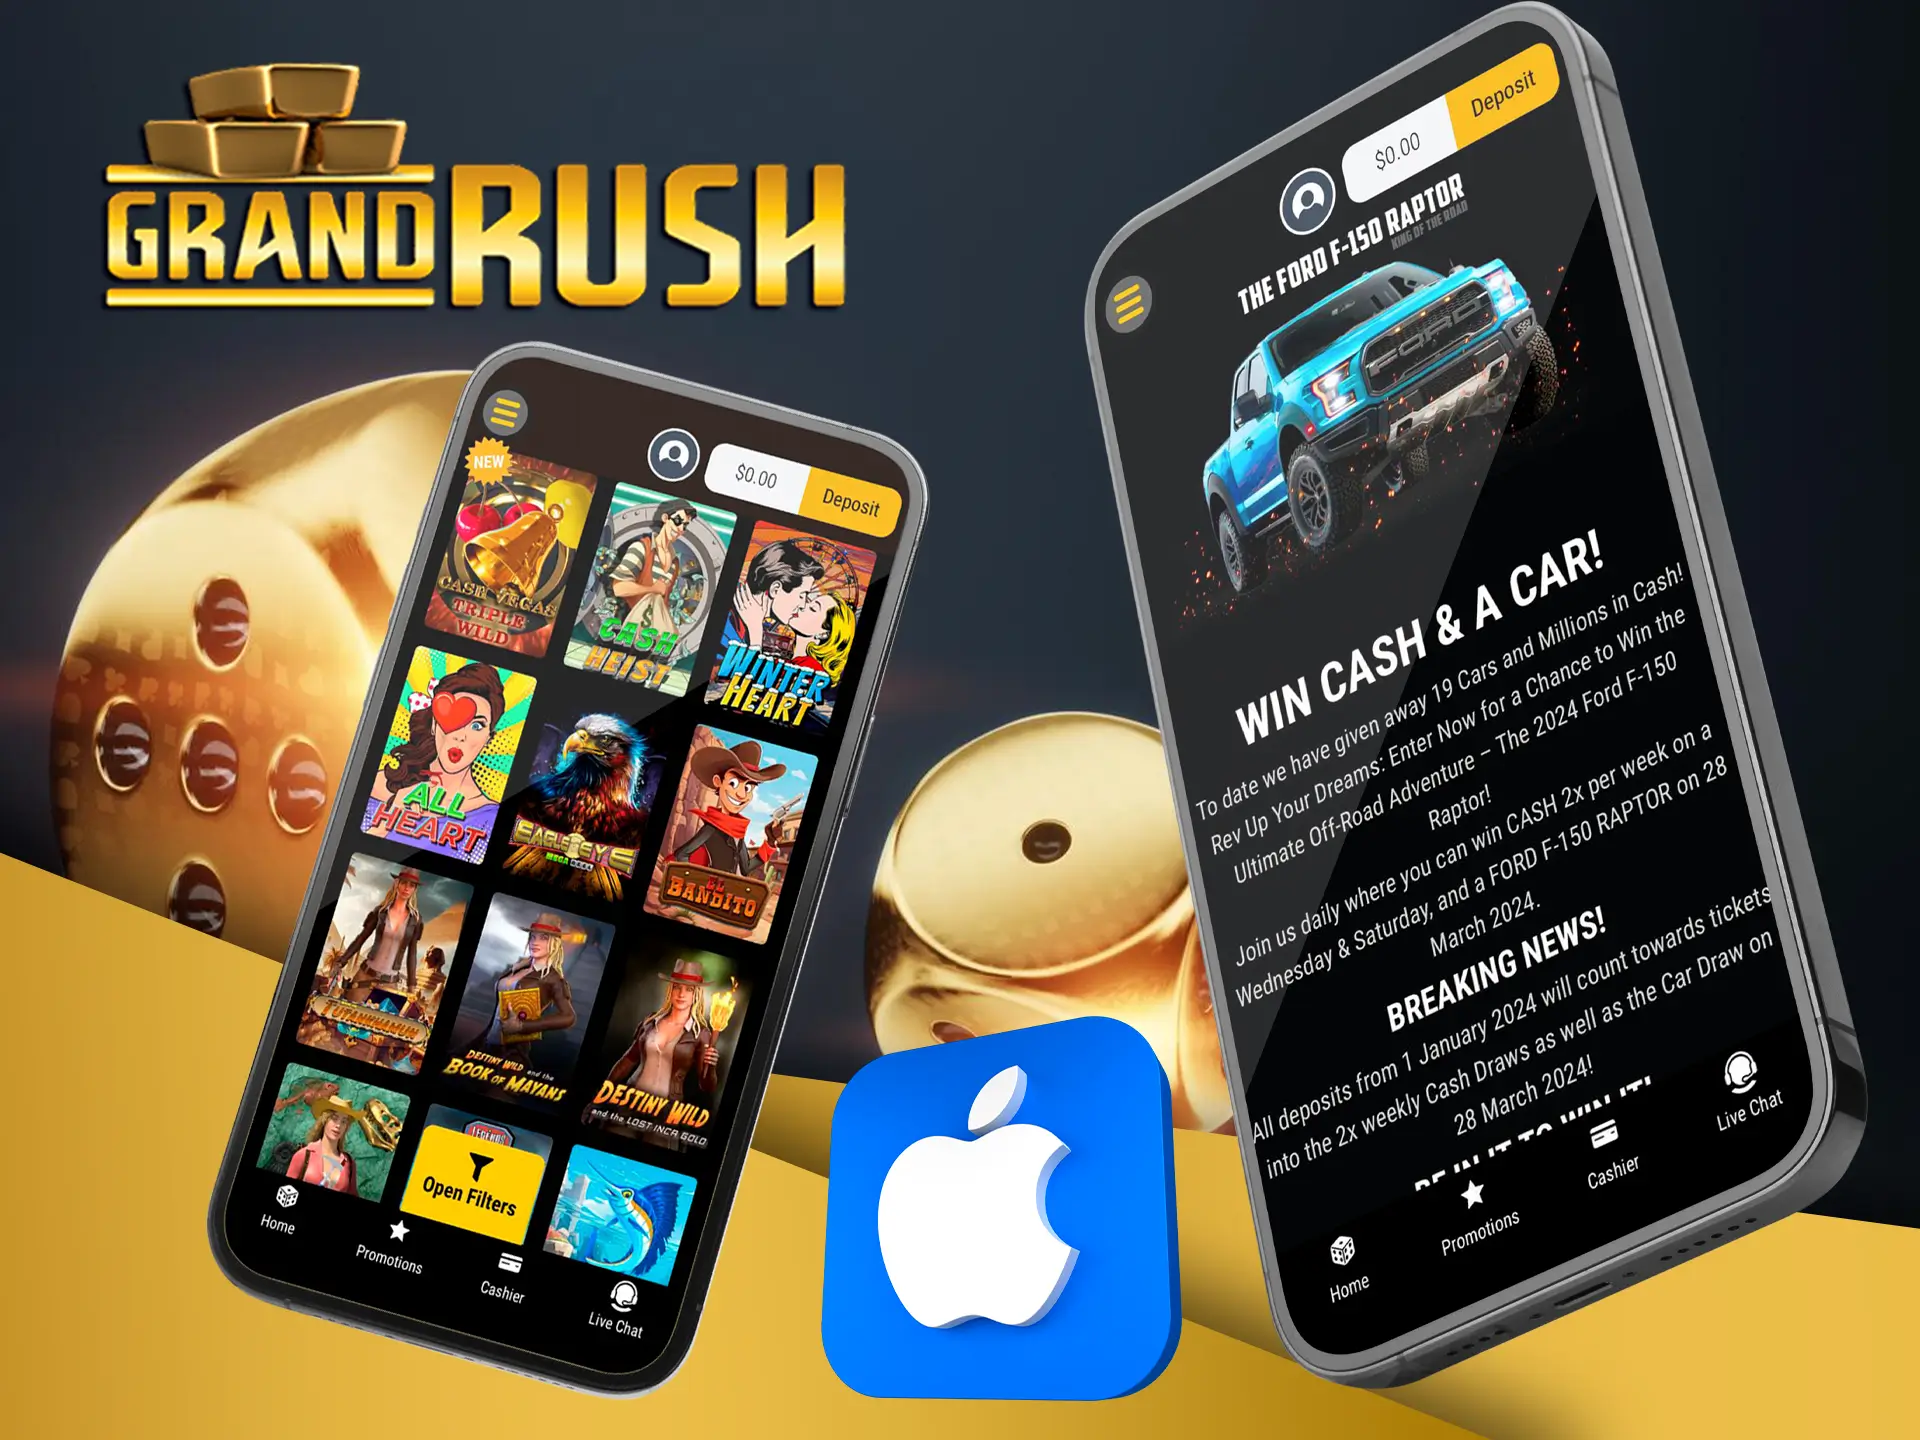 You can use the Grand Rush mobile app on any iOS device.